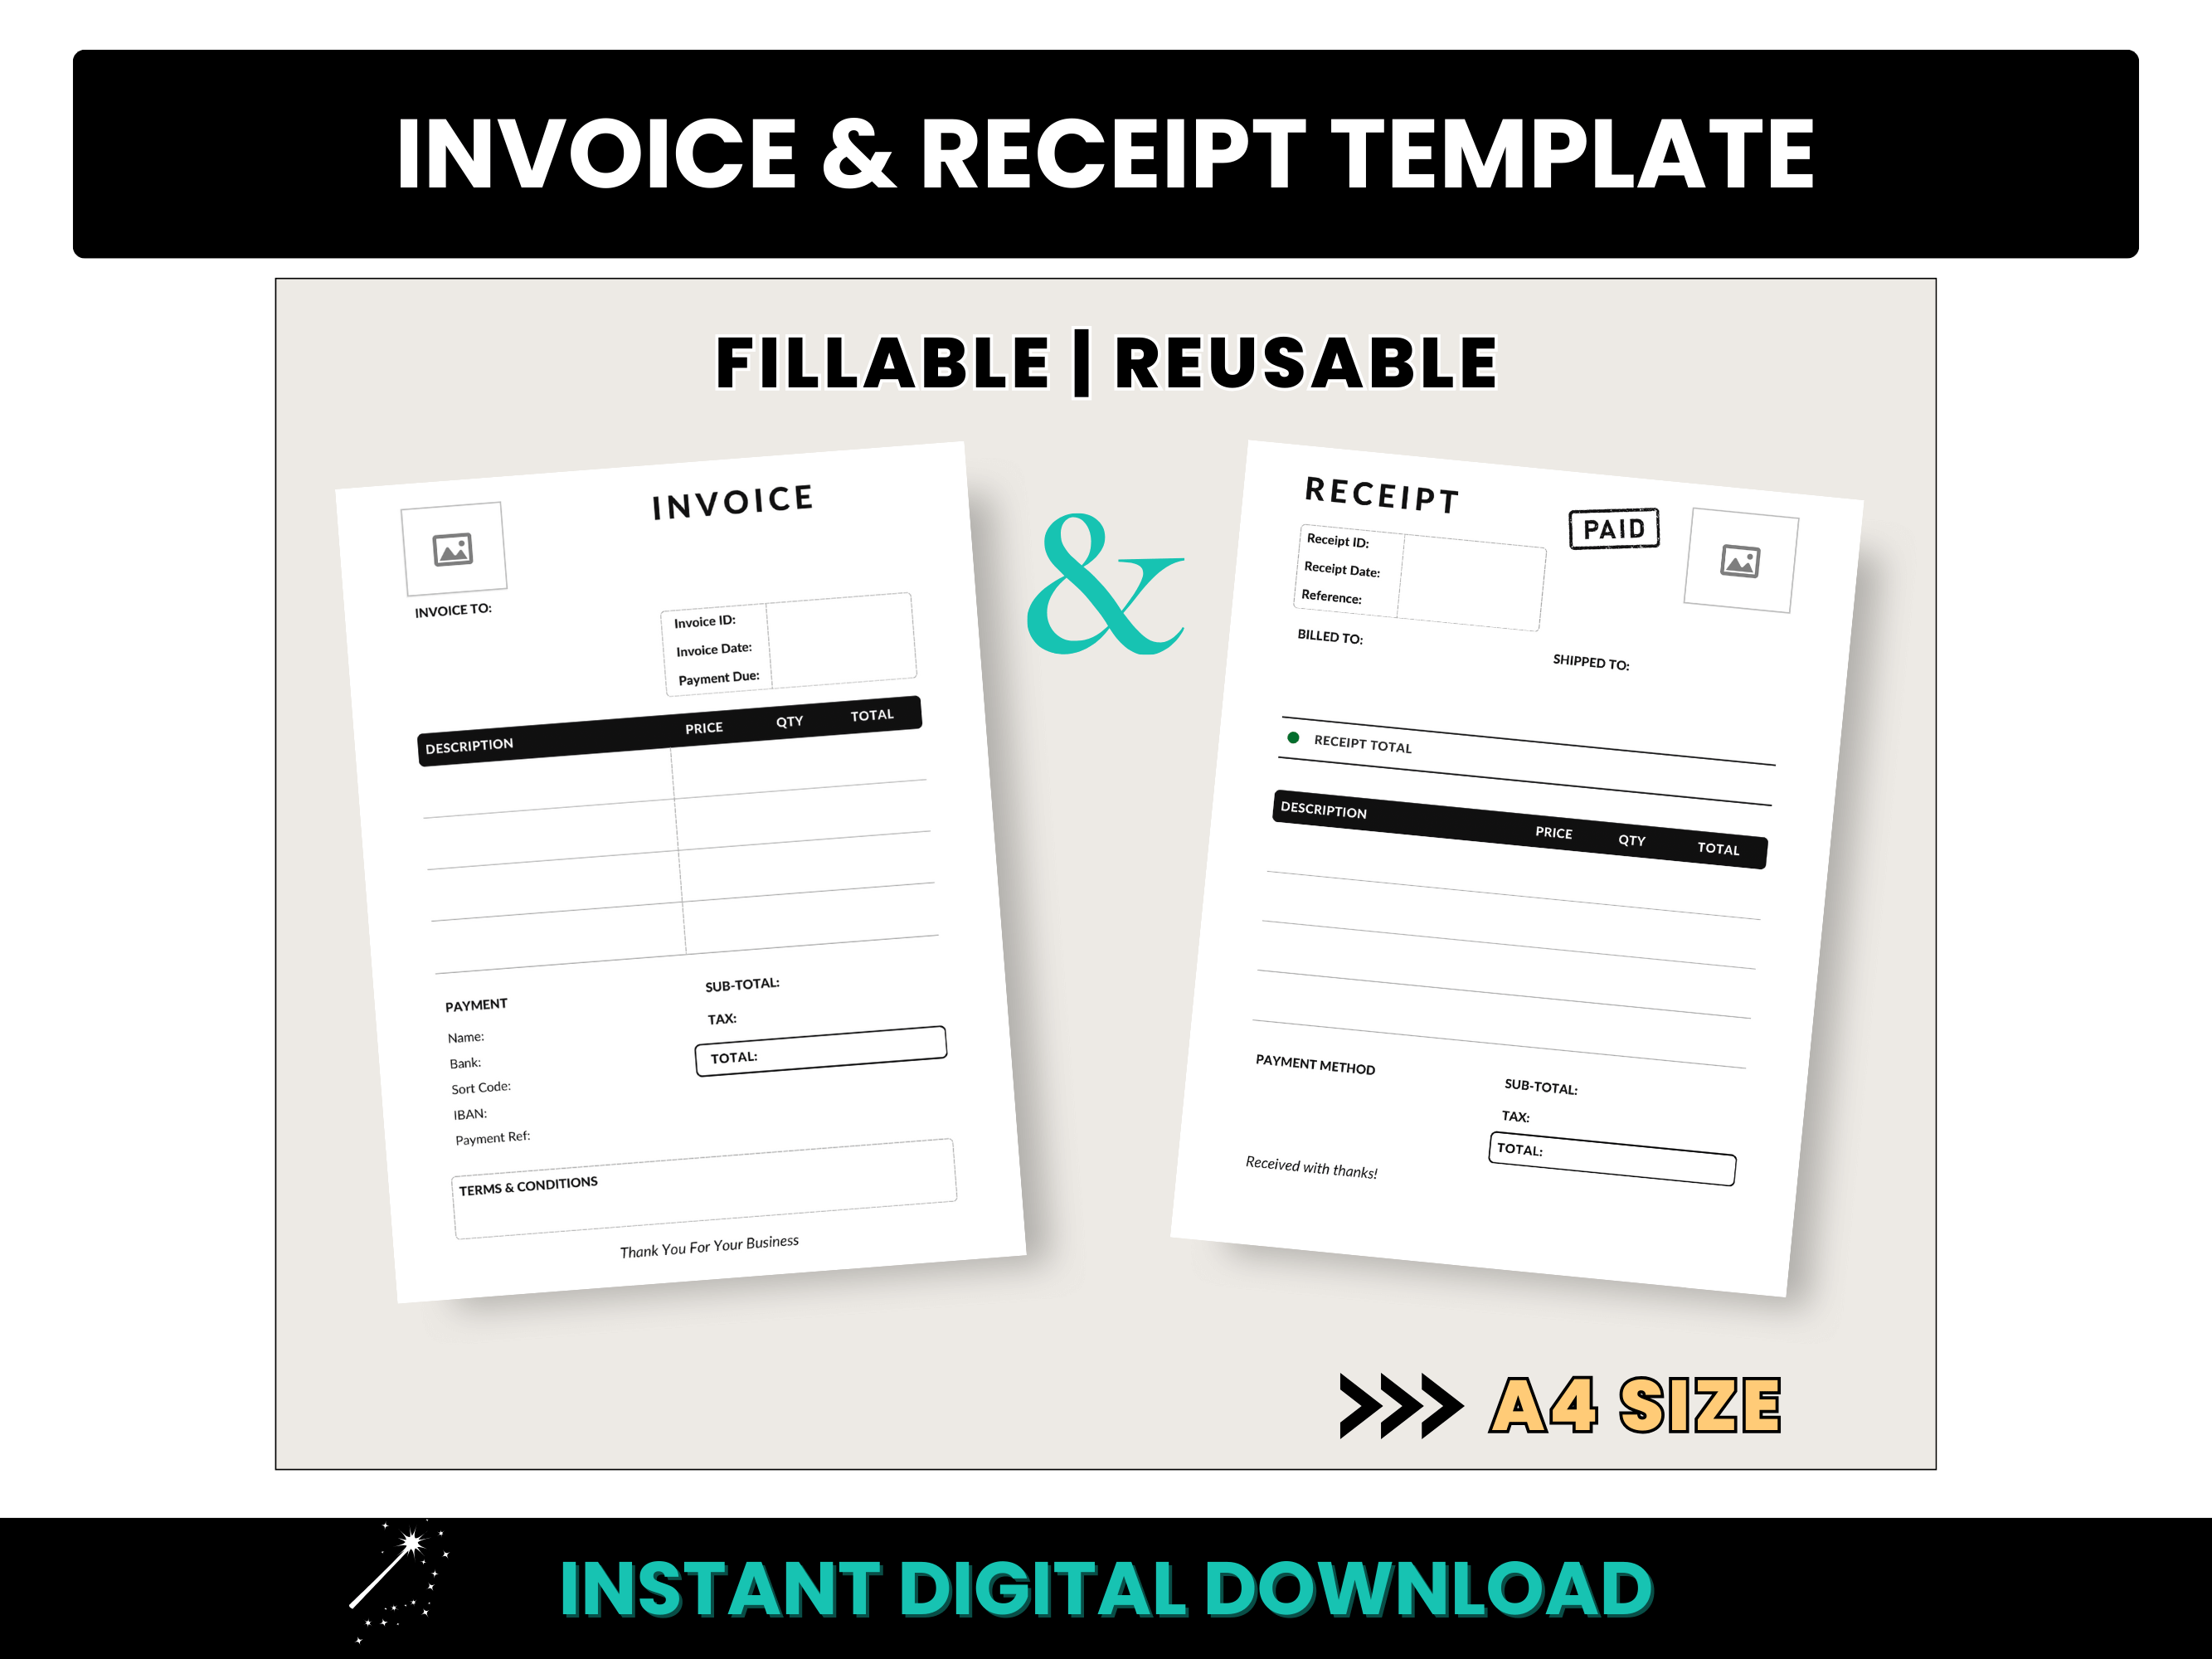 Invoice and Receipt Fillable PDF Template